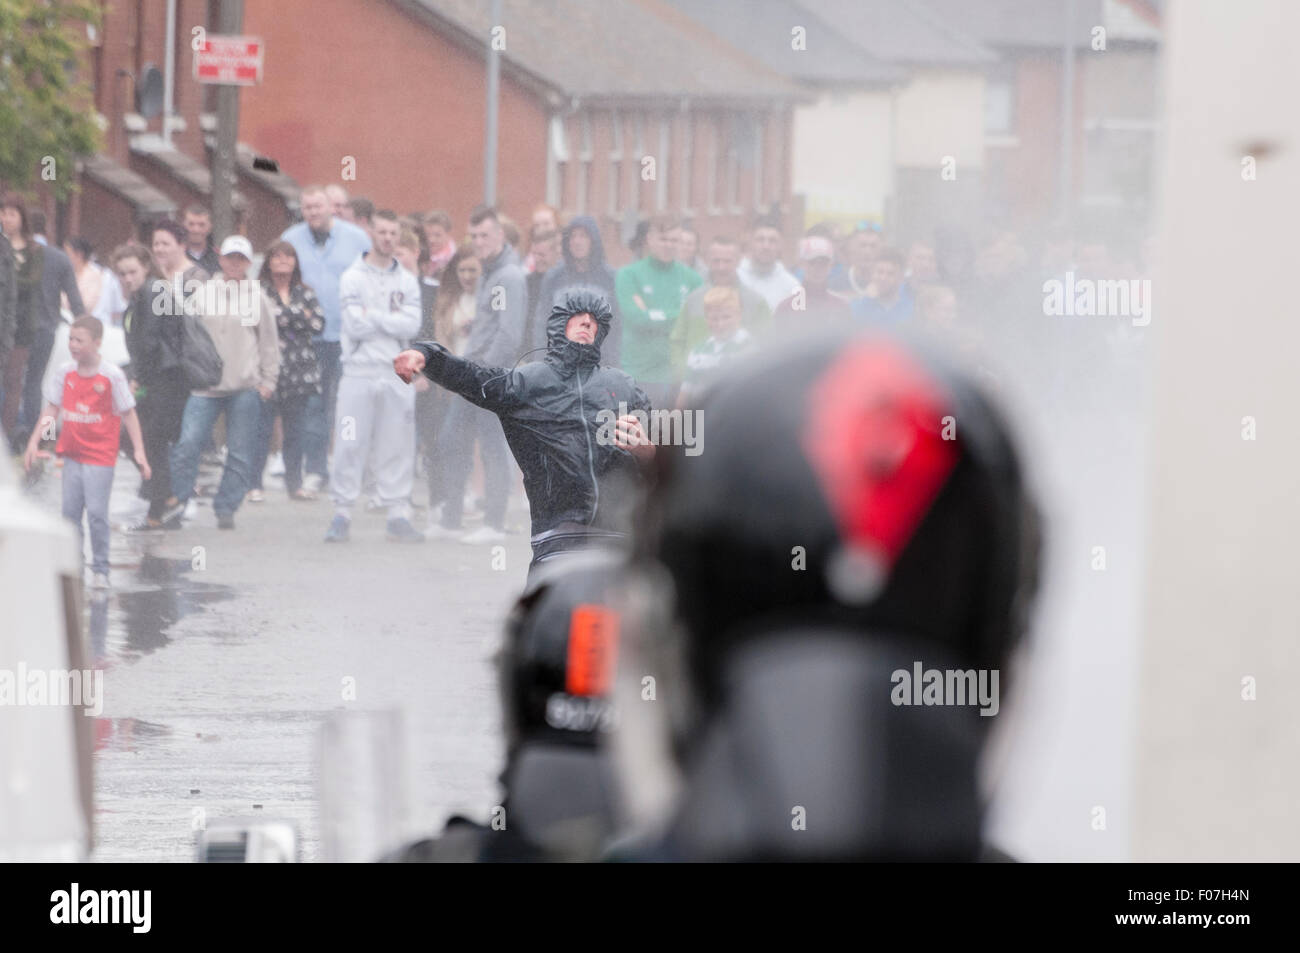 Belfast, Northern Ireland. 09 Aug 2015 - A nationalist youth throws a stone at PSNI officers while being sprayed by a water cannon following an anti-internment rally. Credit:  Stephen Barnes/Alamy Live News Stock Photo